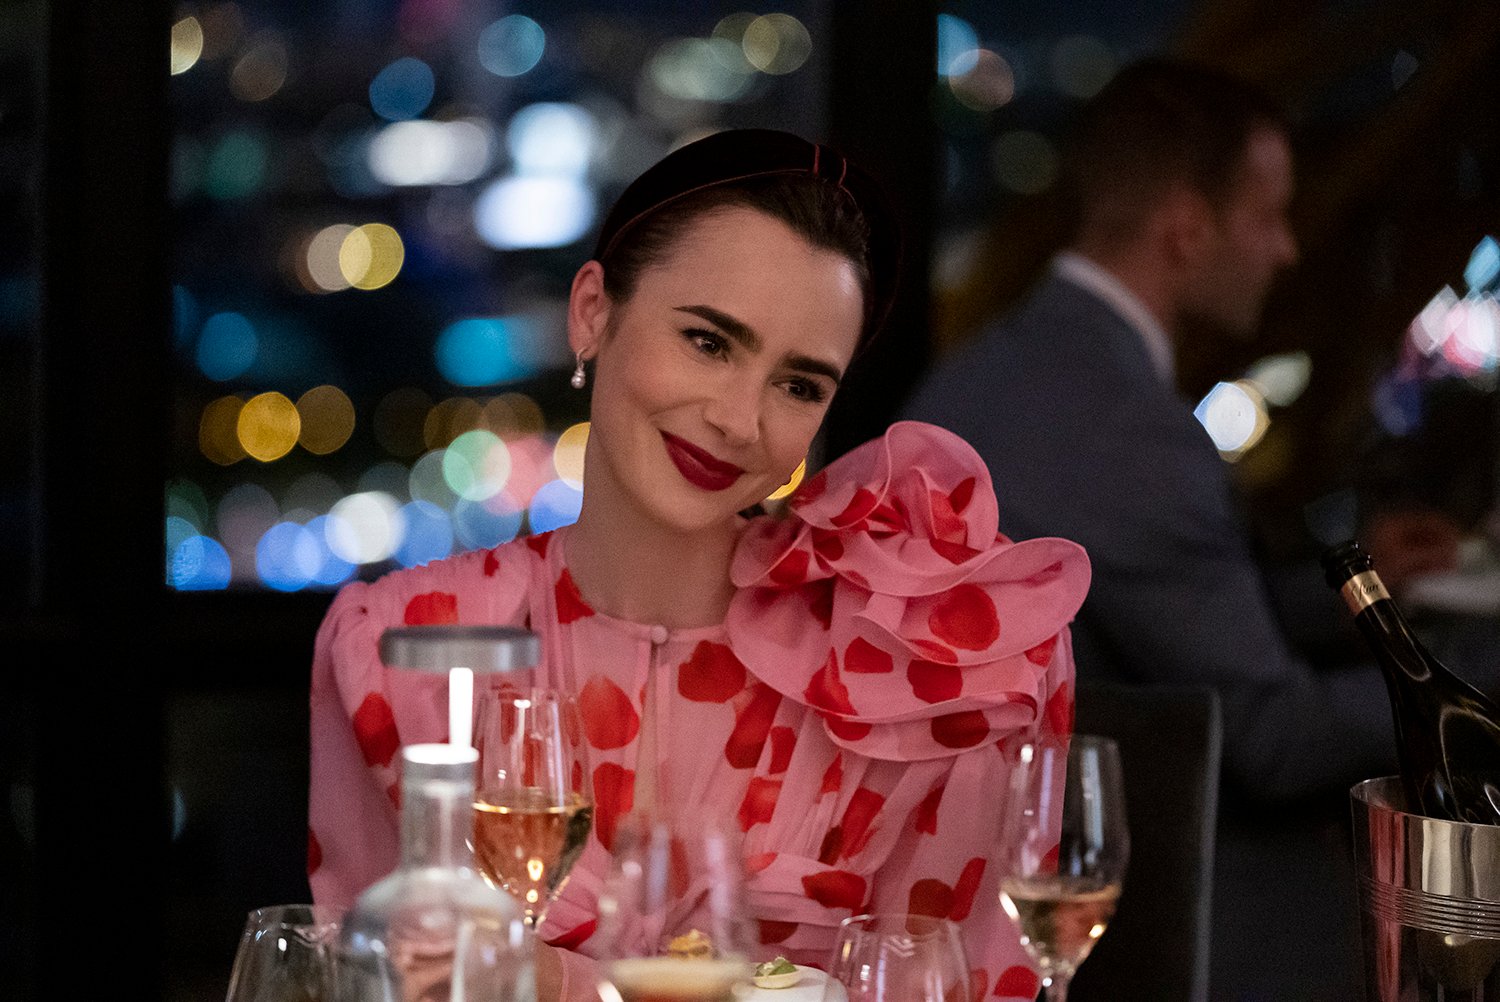 Emily in Paris Season 3: Lily Collins as Emily Cooper sitting at a dinner table surrounded by wine glasses and smiling as she wears a pink and red ruffled dress.